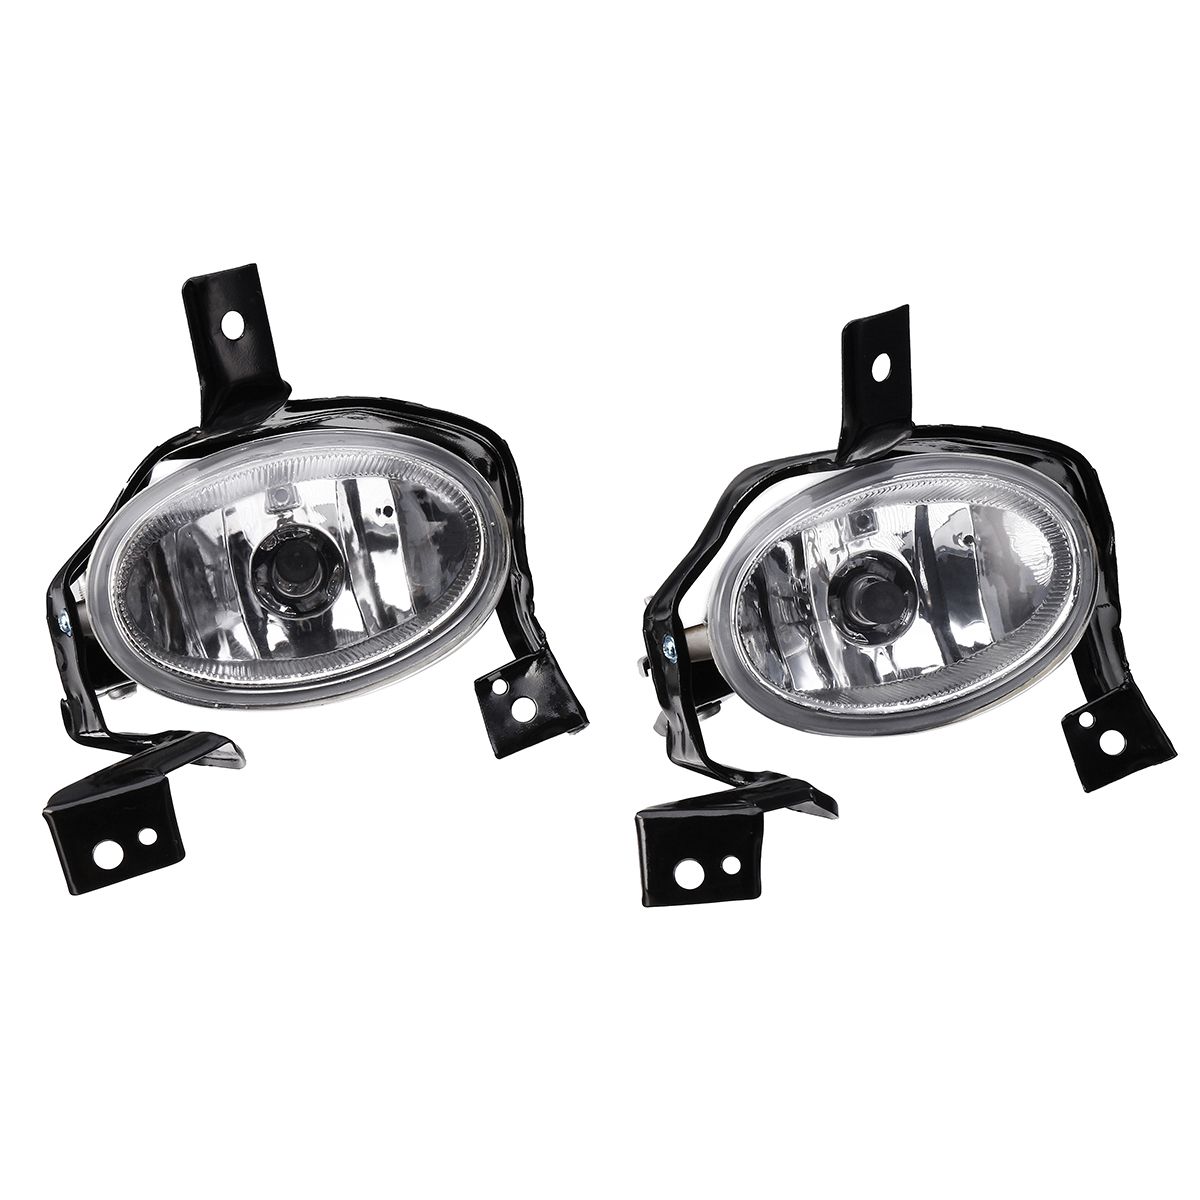 Pair-55W-Car-Front-Bumper-Fog-Lights-with-Halogen-Lamps-Yellow-for-Honda-CR-V-2010-2011-1349436